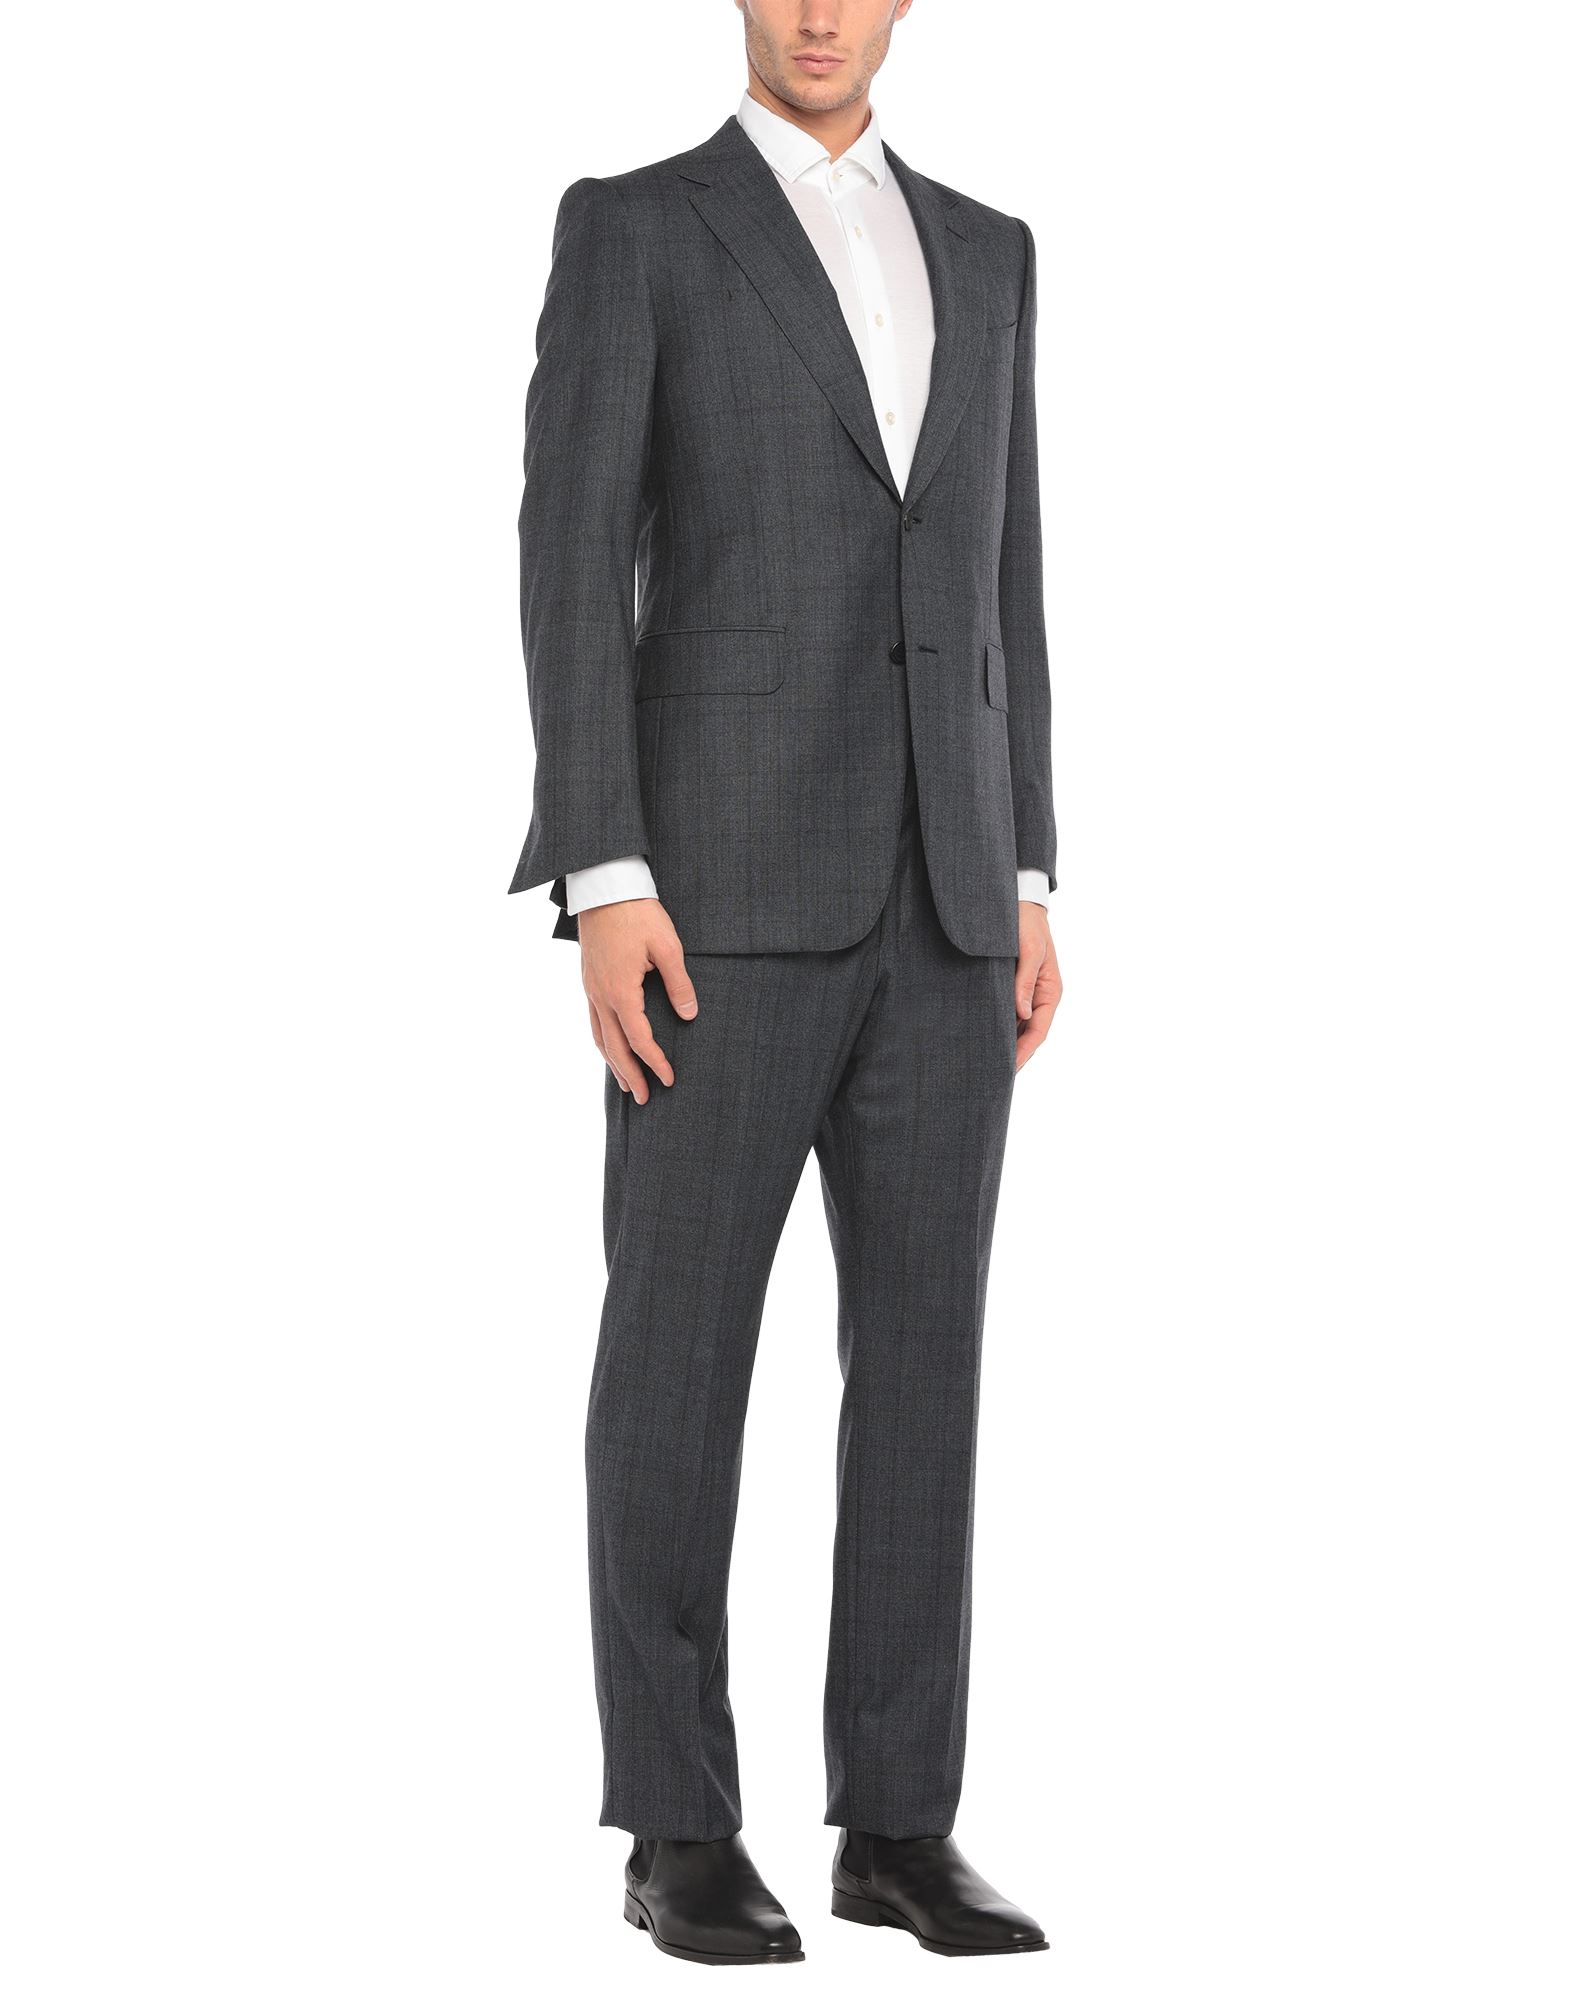 DUNHILL Suits - Item 49611053